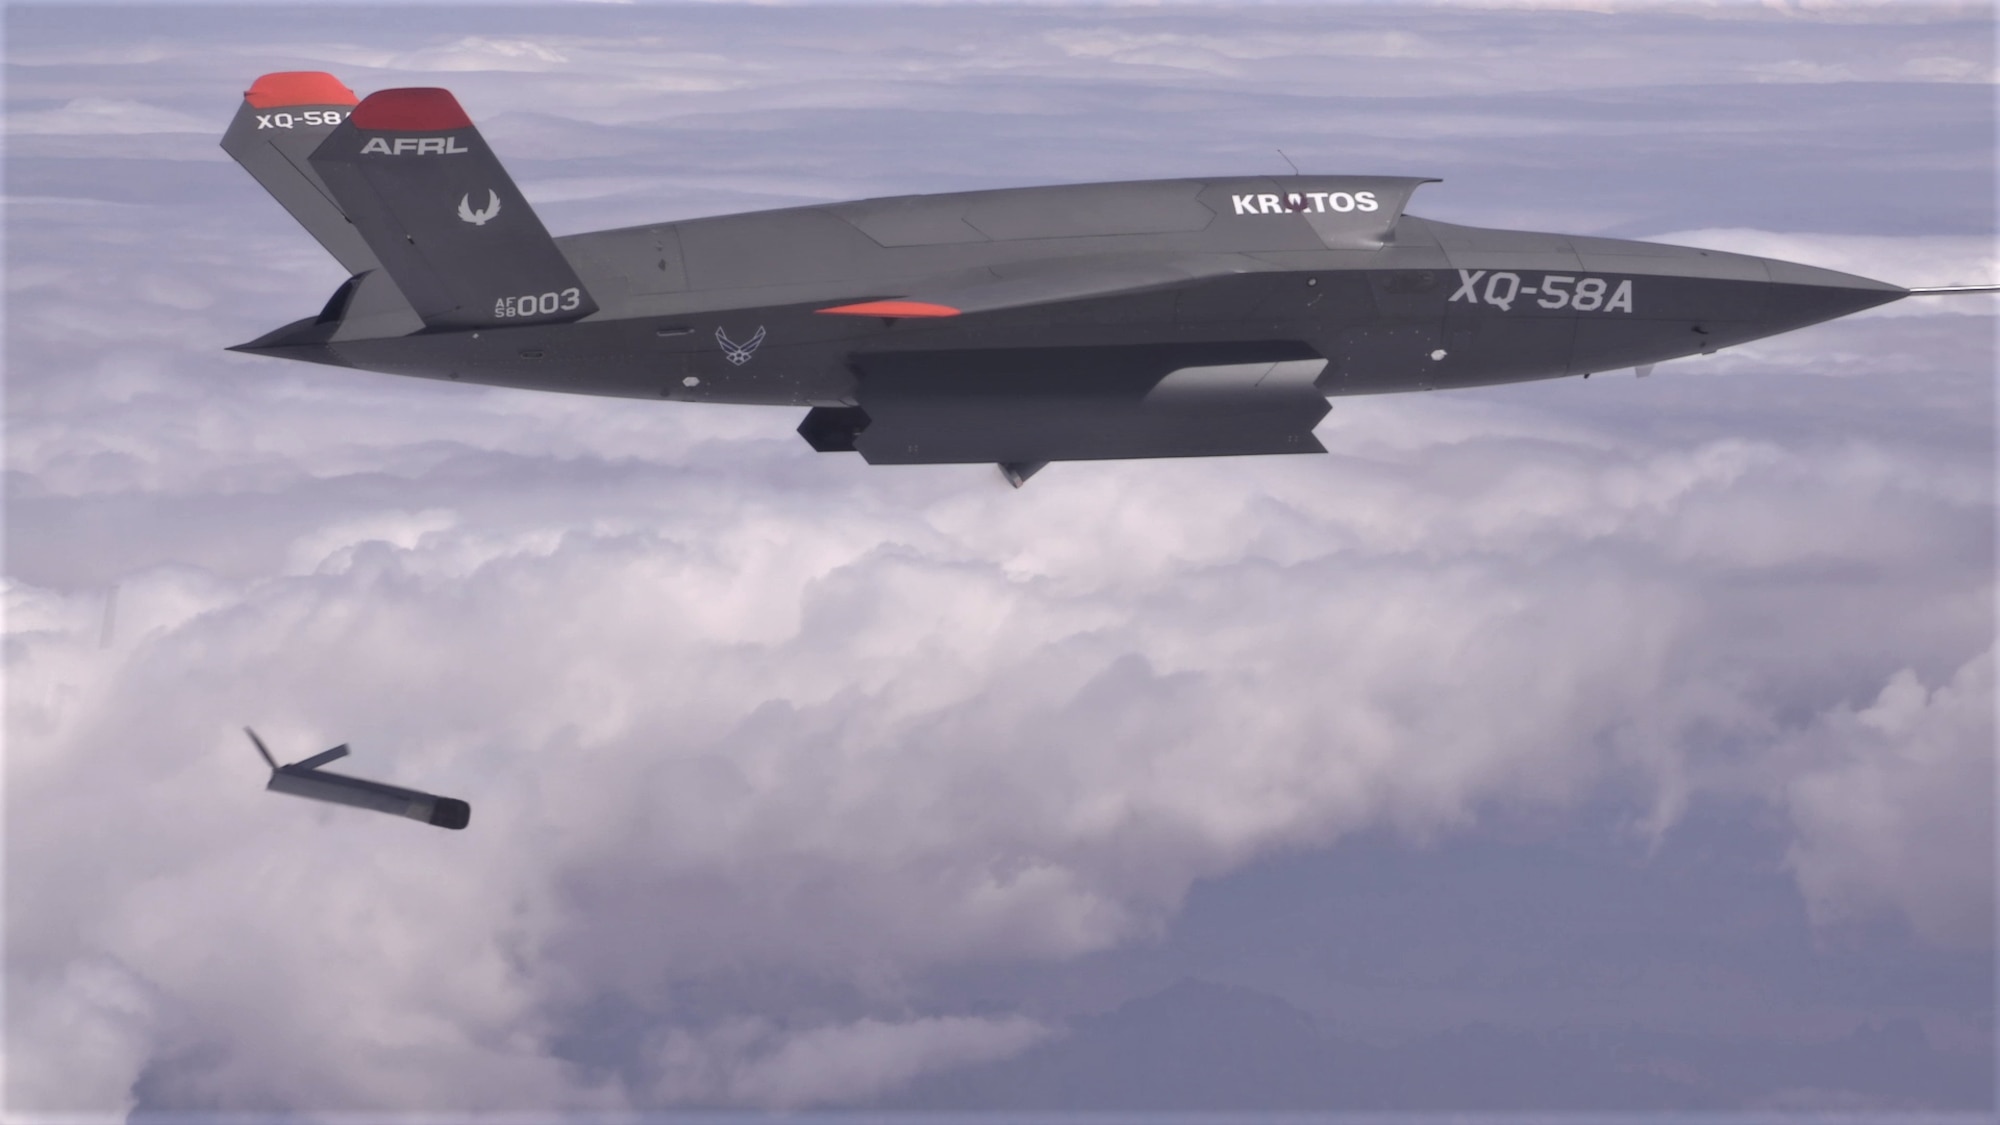 The XQ-58A Valkyrie demonstrates the separation of the ALTIUS-600 small UAS in a test at the U.S. Army Yuma Proving Ground test range, Arizona on March 26, 2021. This test was the first time the weapons bay doors have been opened in flight. (Courtesy photo)